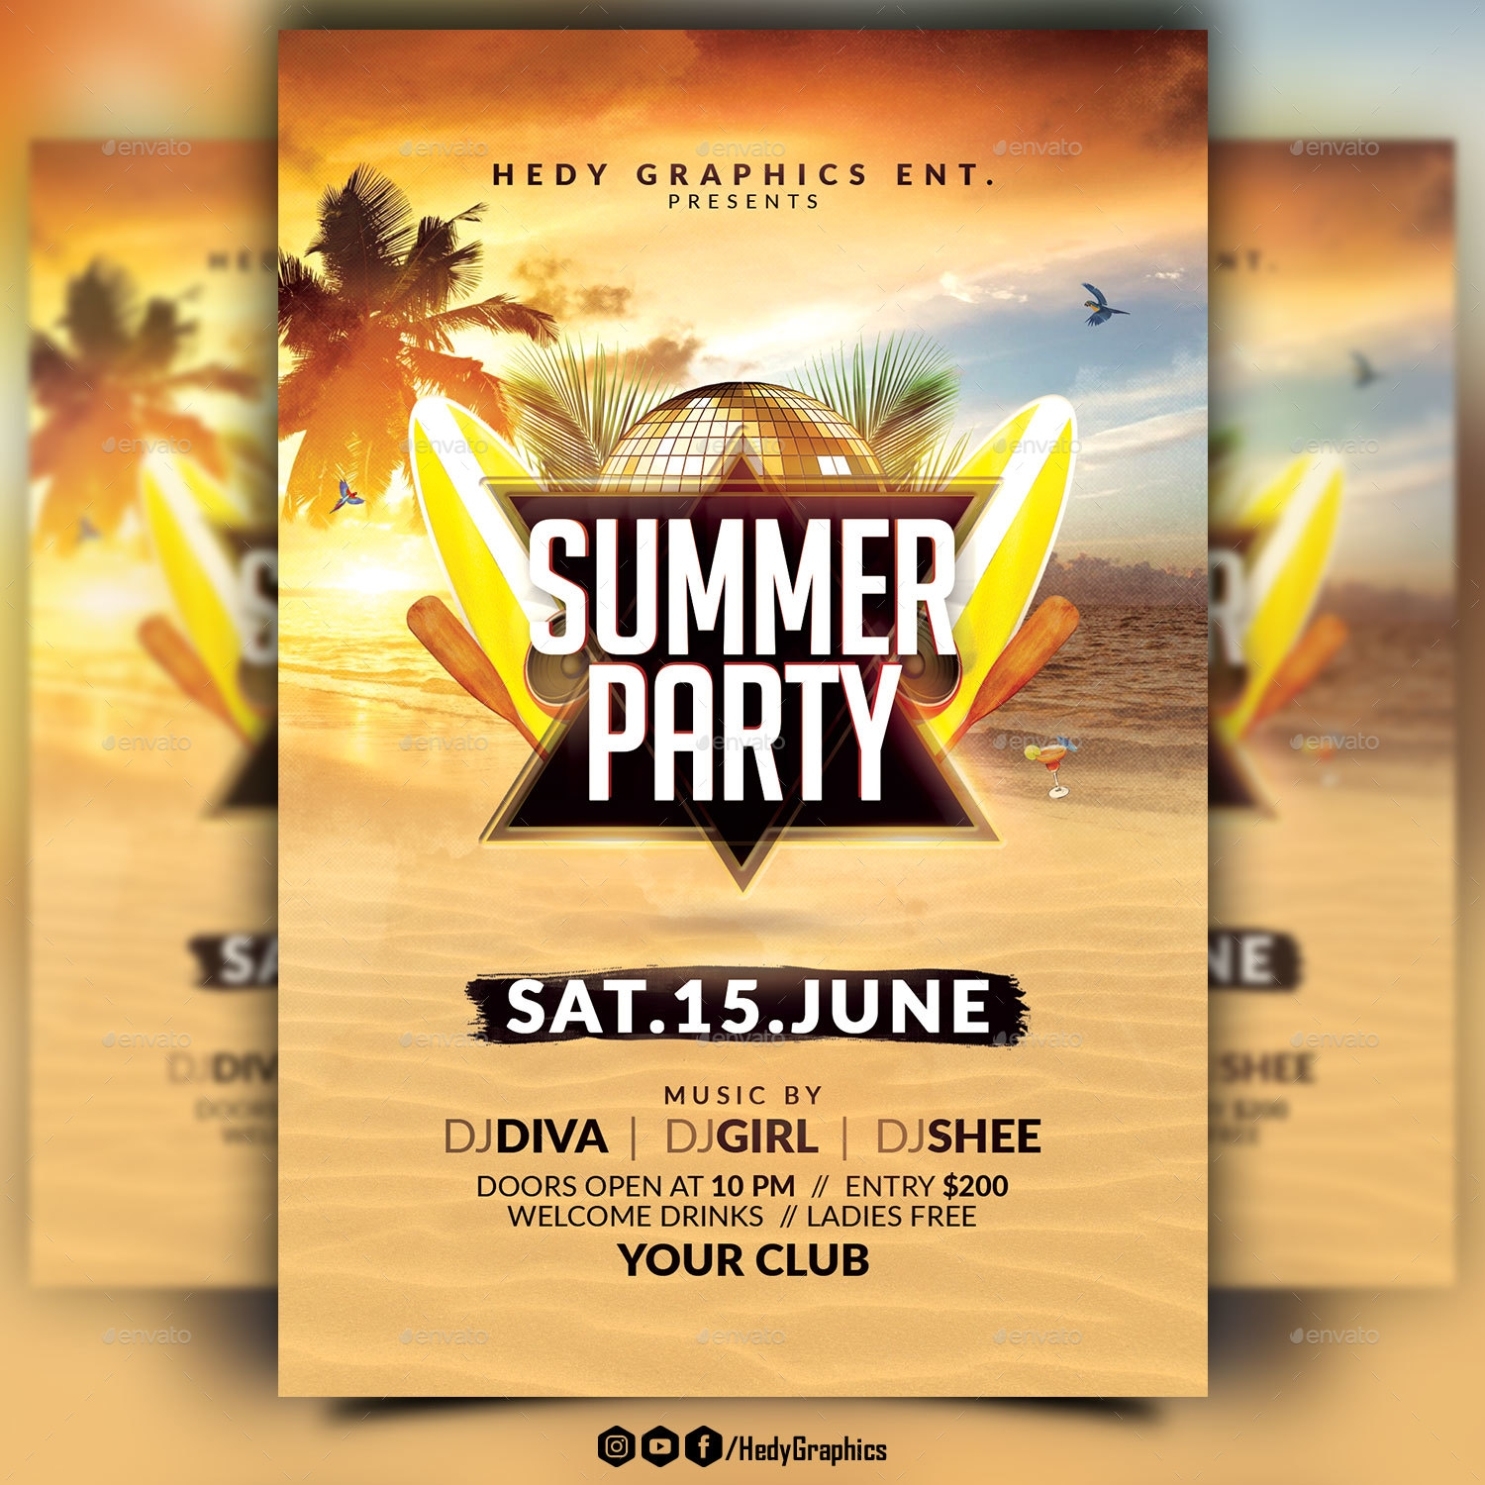 Summer Party Flyer Template By Hedygraphics | Graphicriver Pertaining To Flyer Maker Template